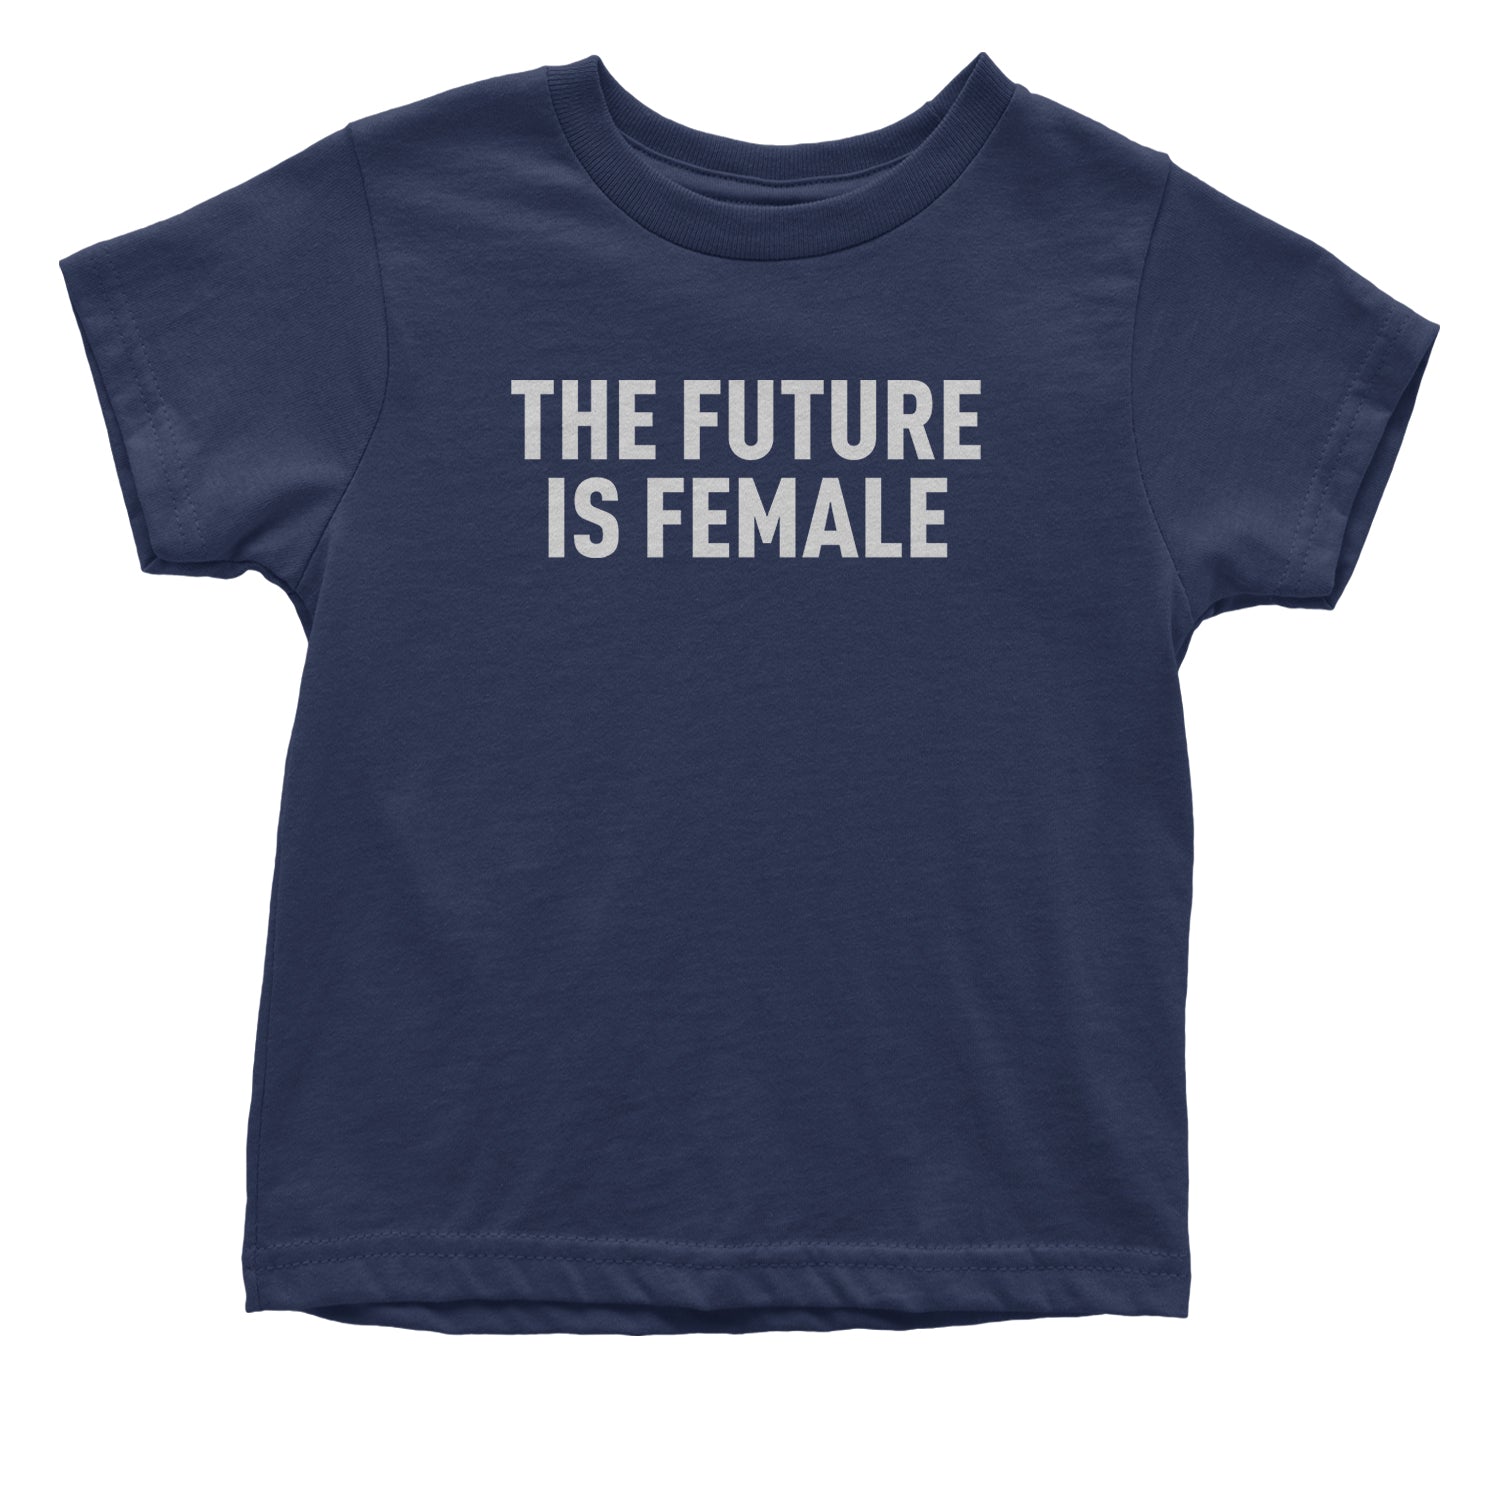 The Future Is Female Feminism Infant One-Piece Romper Bodysuit and Toddler T-shirt female, feminism, feminist, femme, future, is, liberation, suffrage, the by Expression Tees